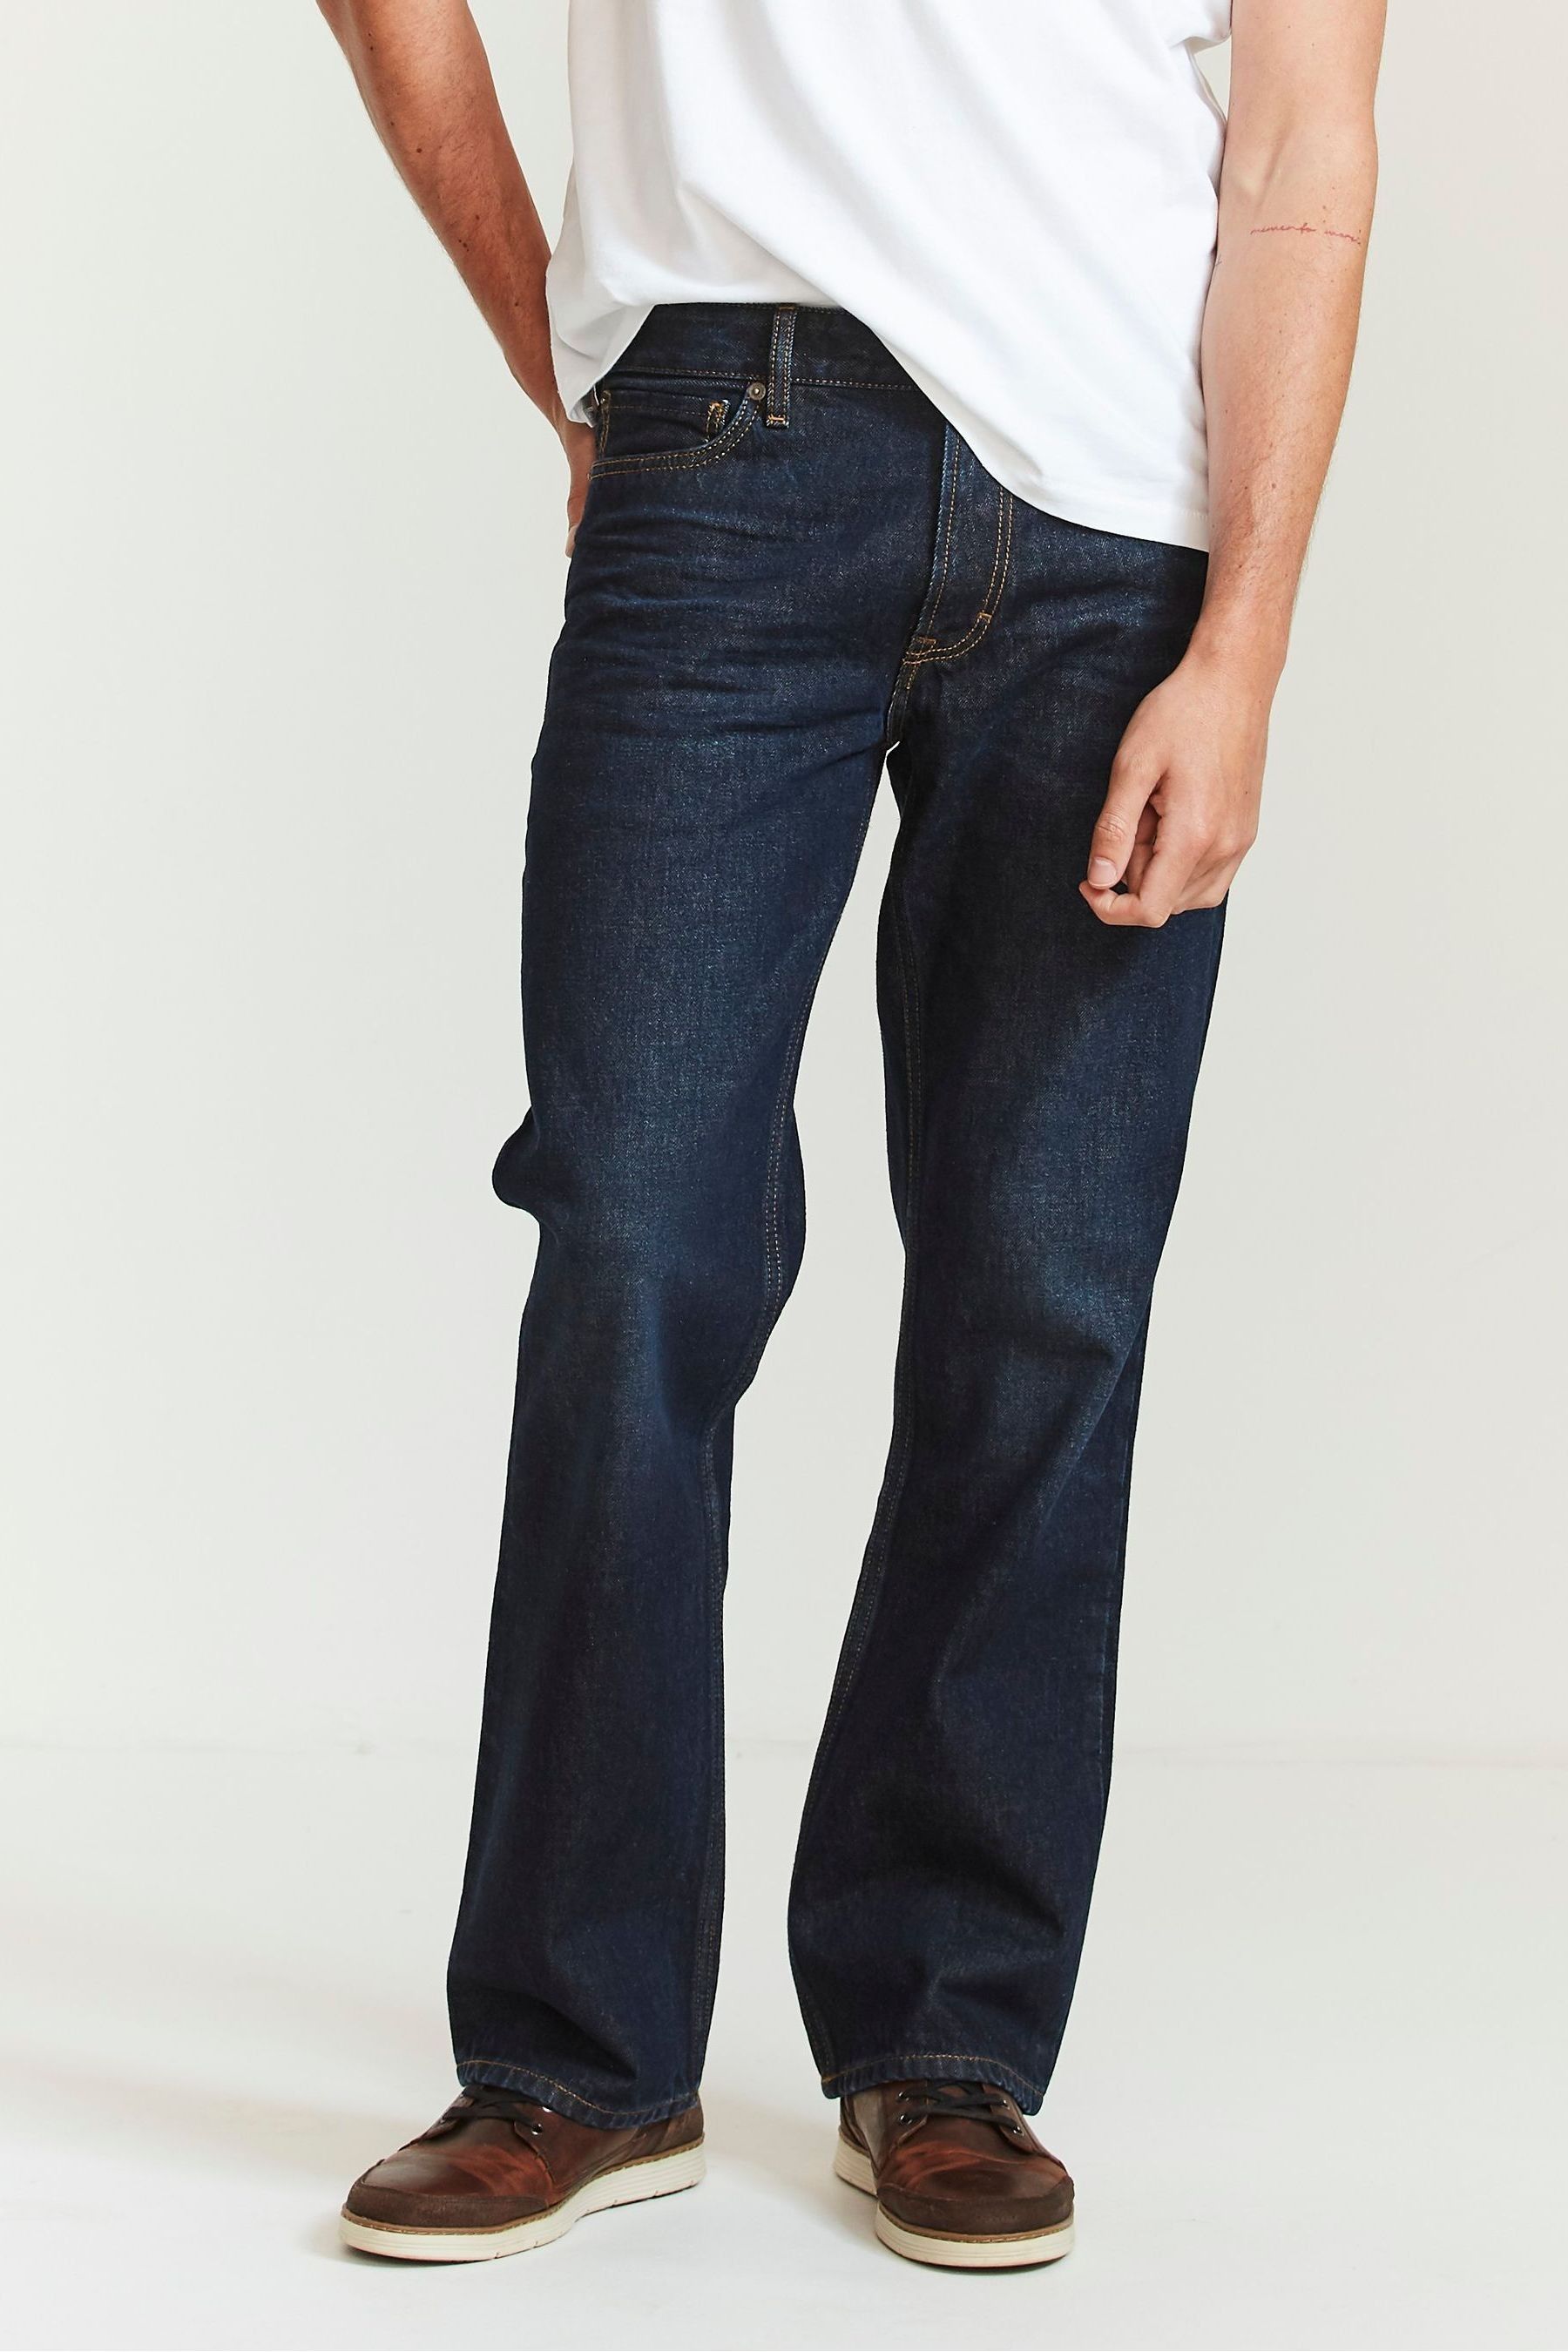 Buy FatFace Dark Vintage Wash Denim Bootcut Jeans from the Next UK ...